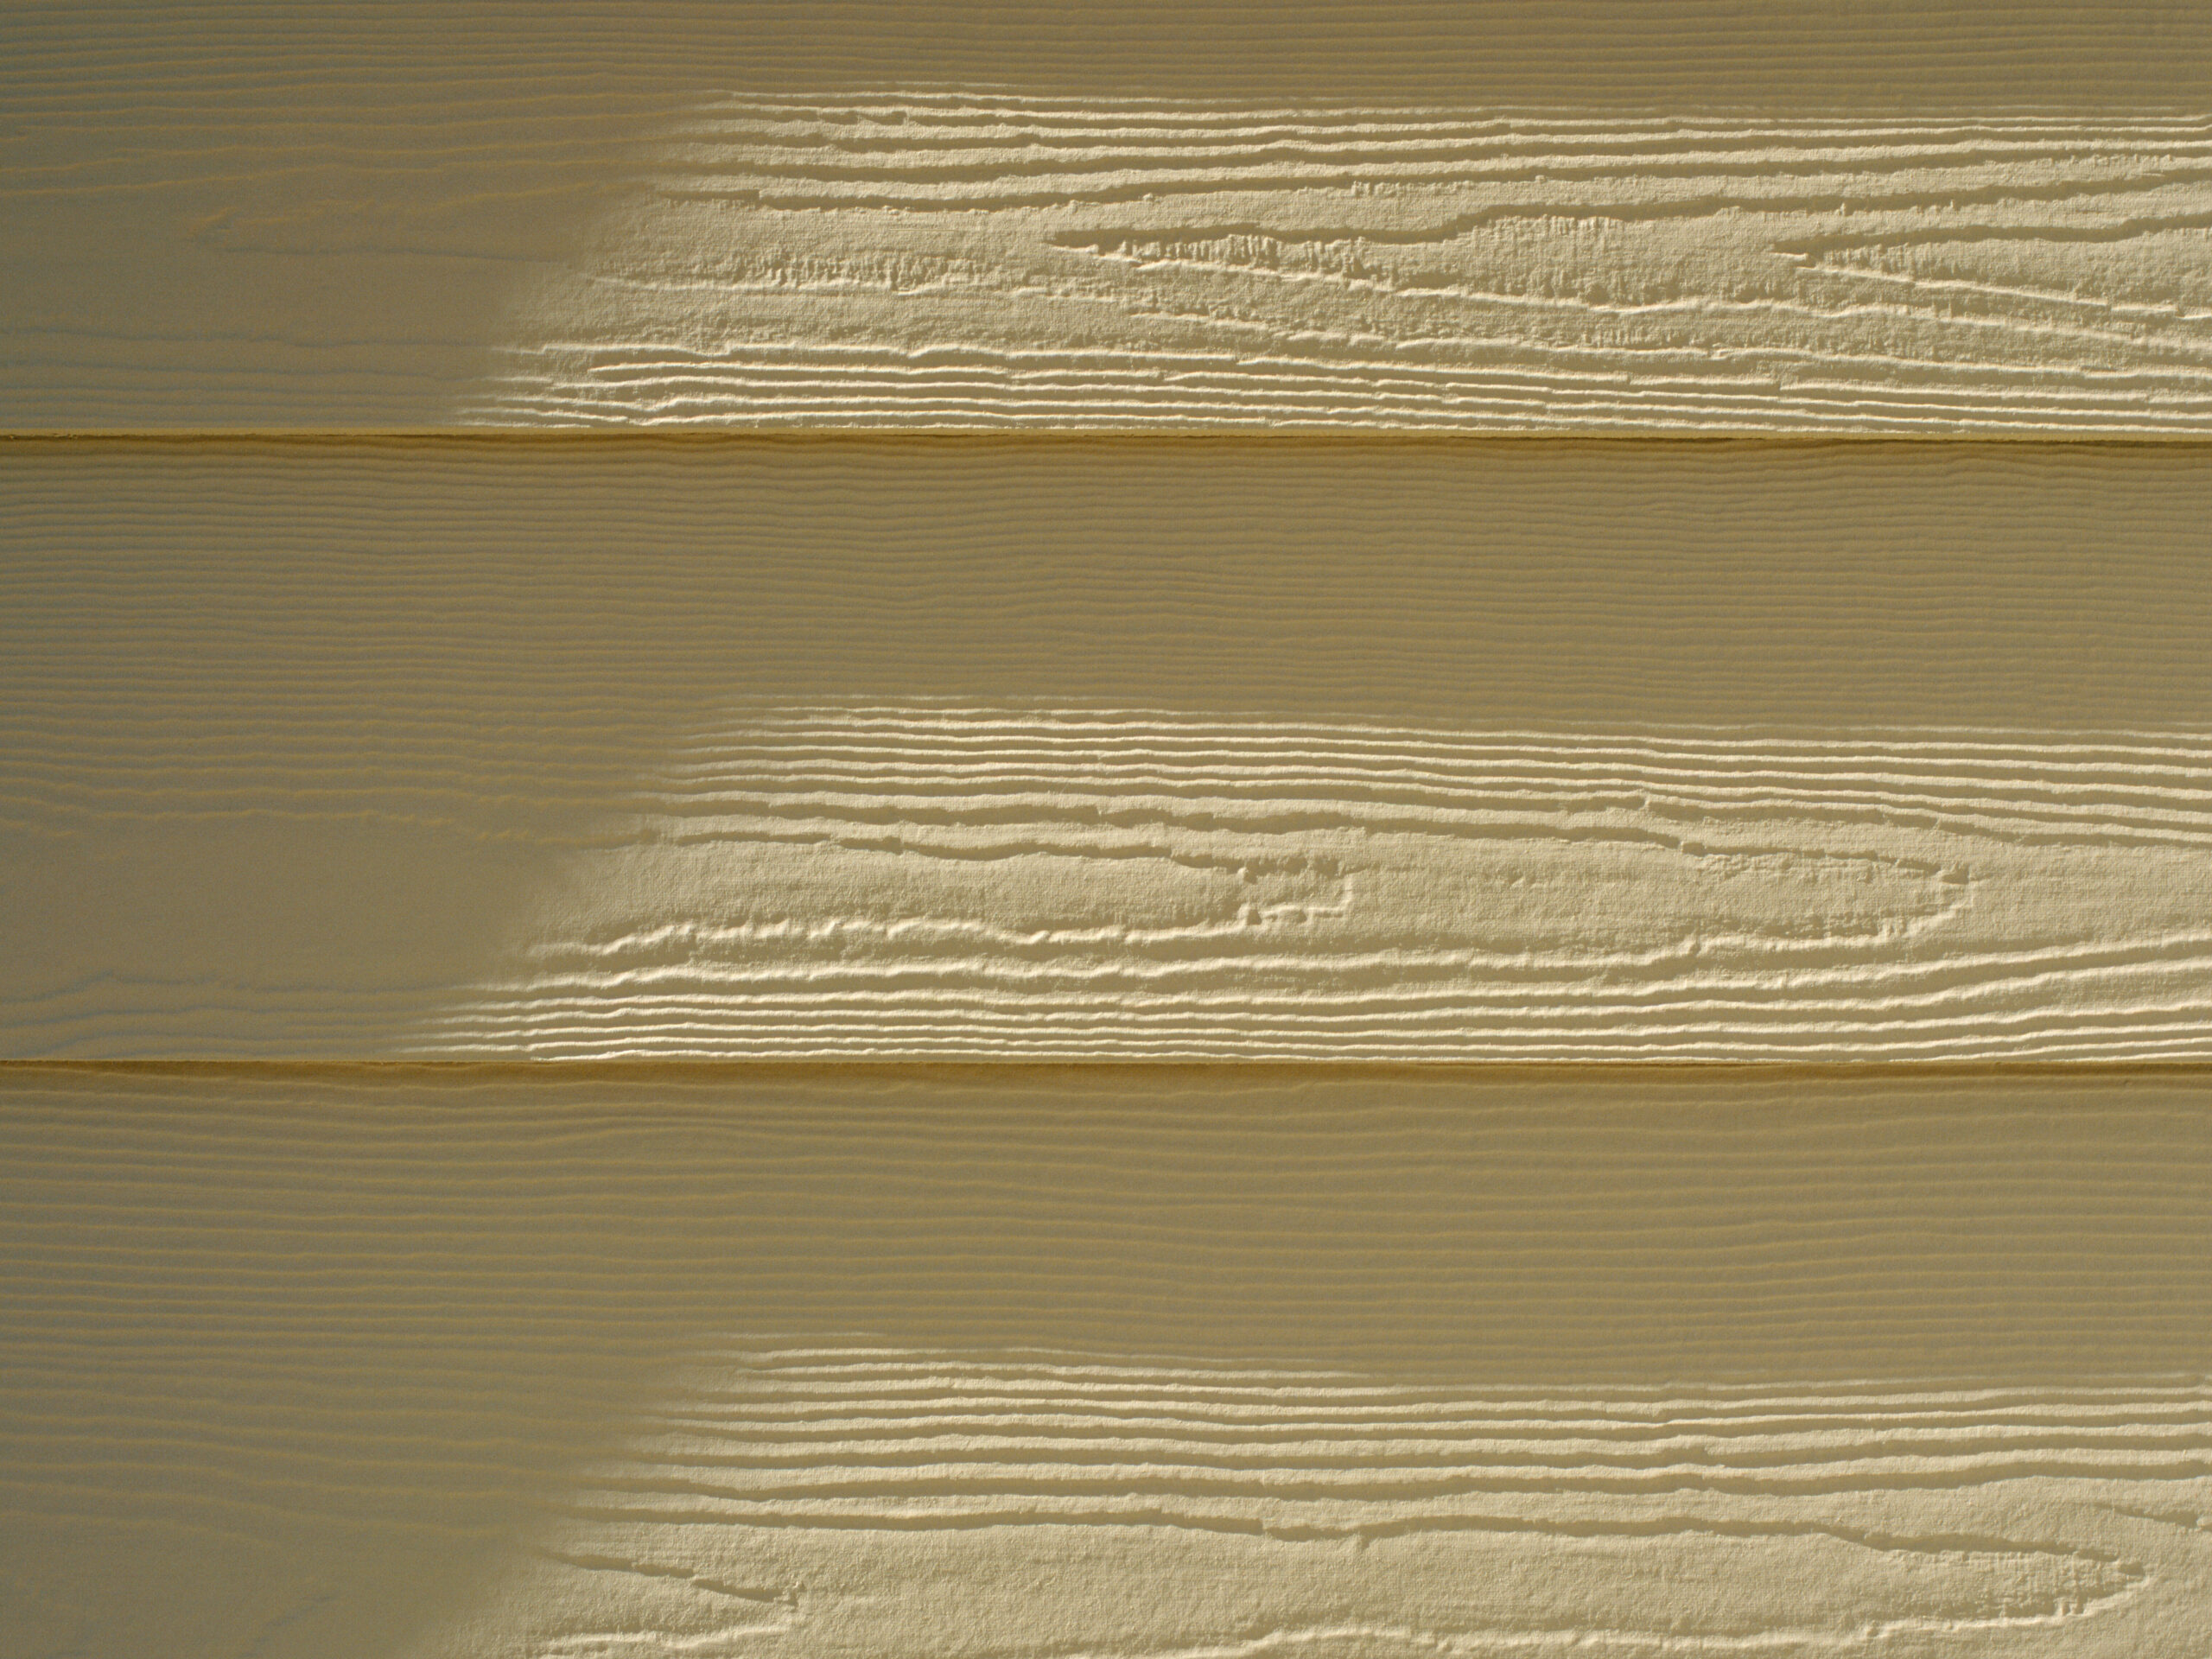 A close-up of some beige siding on a house.